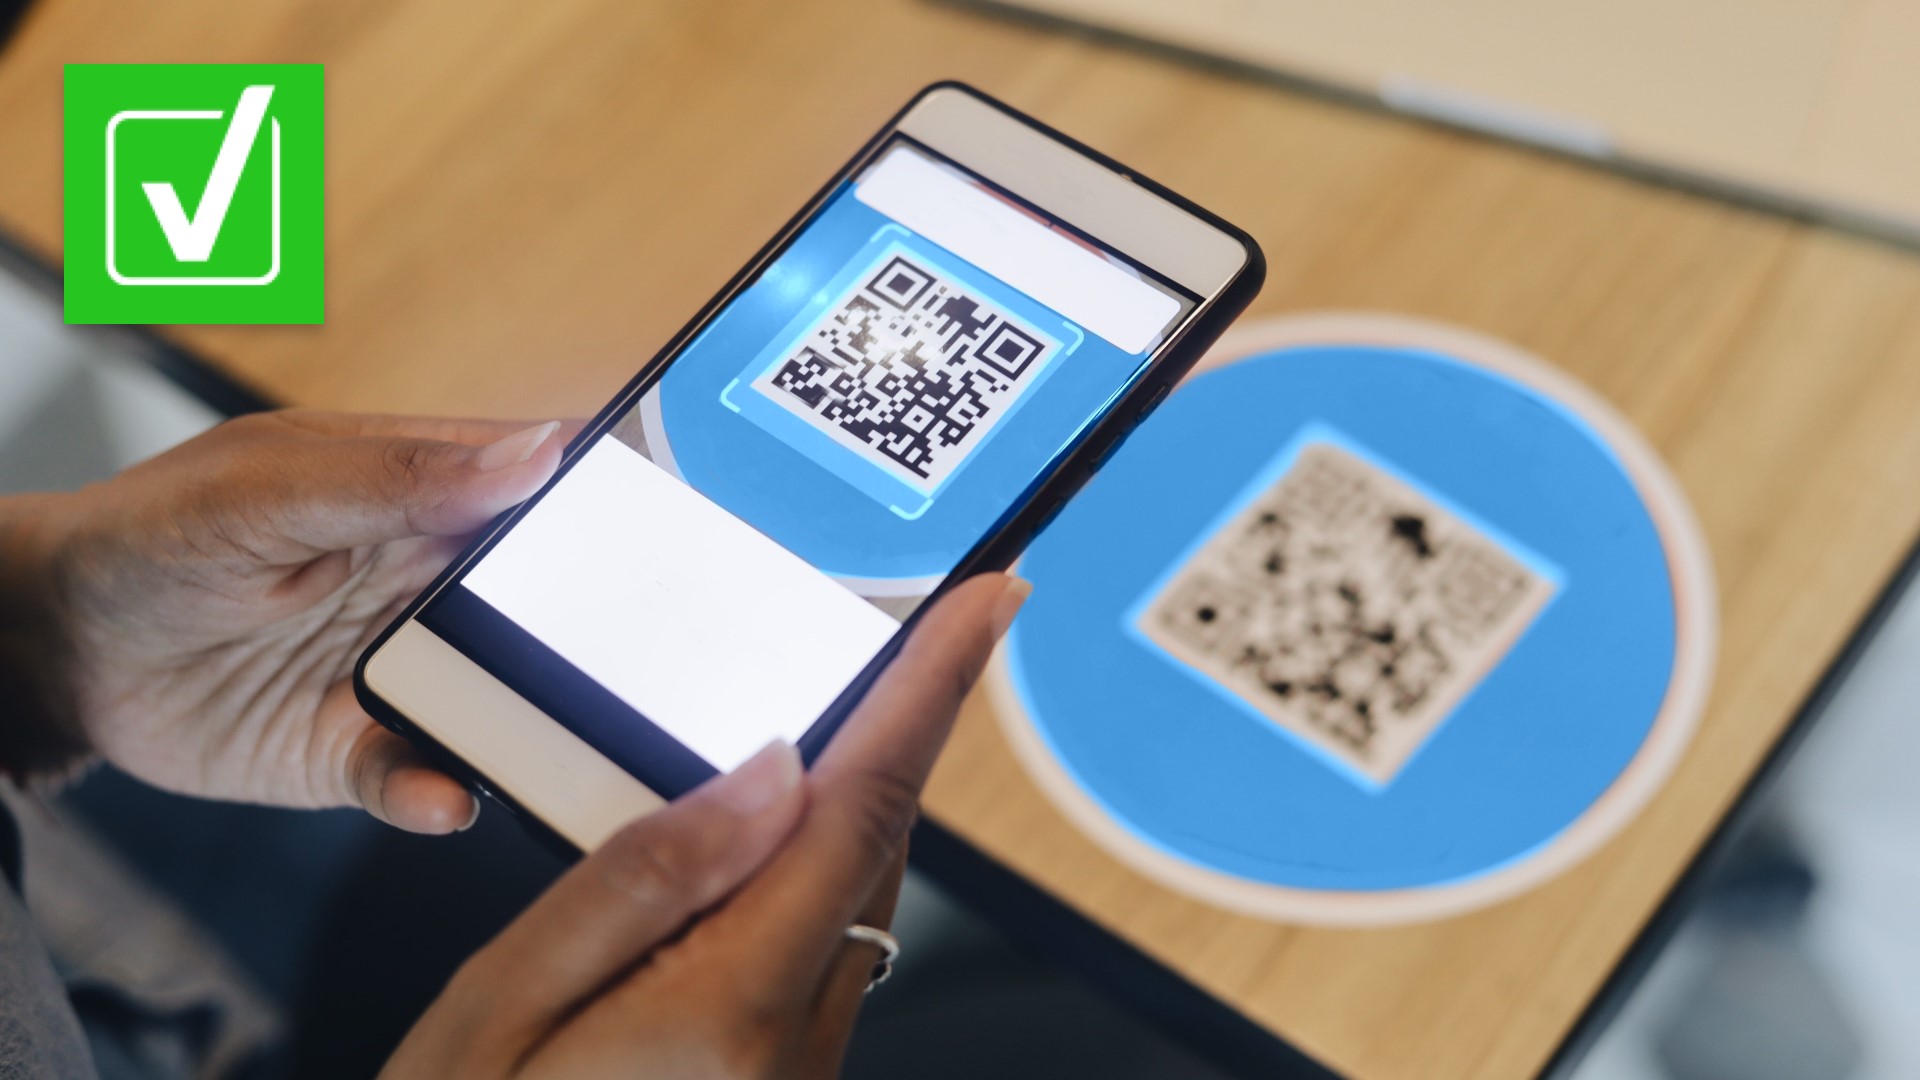 The FBI and Better Business Bureau warn criminals are taking advantage of the convenience — in some cases, even sticking malicious QR codes over real ones.